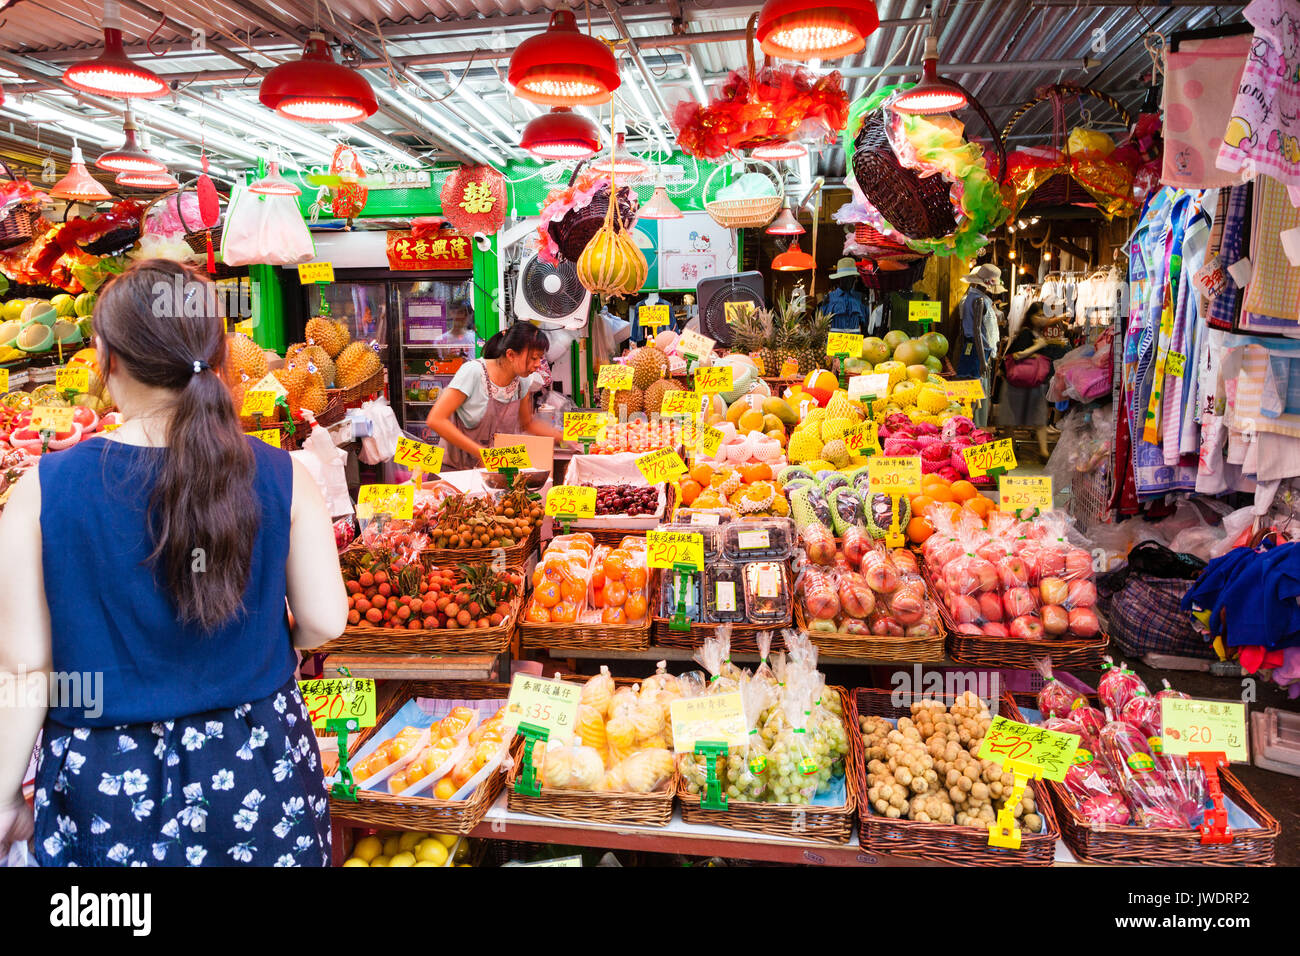 HONG KONG - JULY 10, 2017: A street vendor selling fruits in Fa Yuen Street, Mong Kok. The area is a popular street market where visitors go to shop f Stock Photo